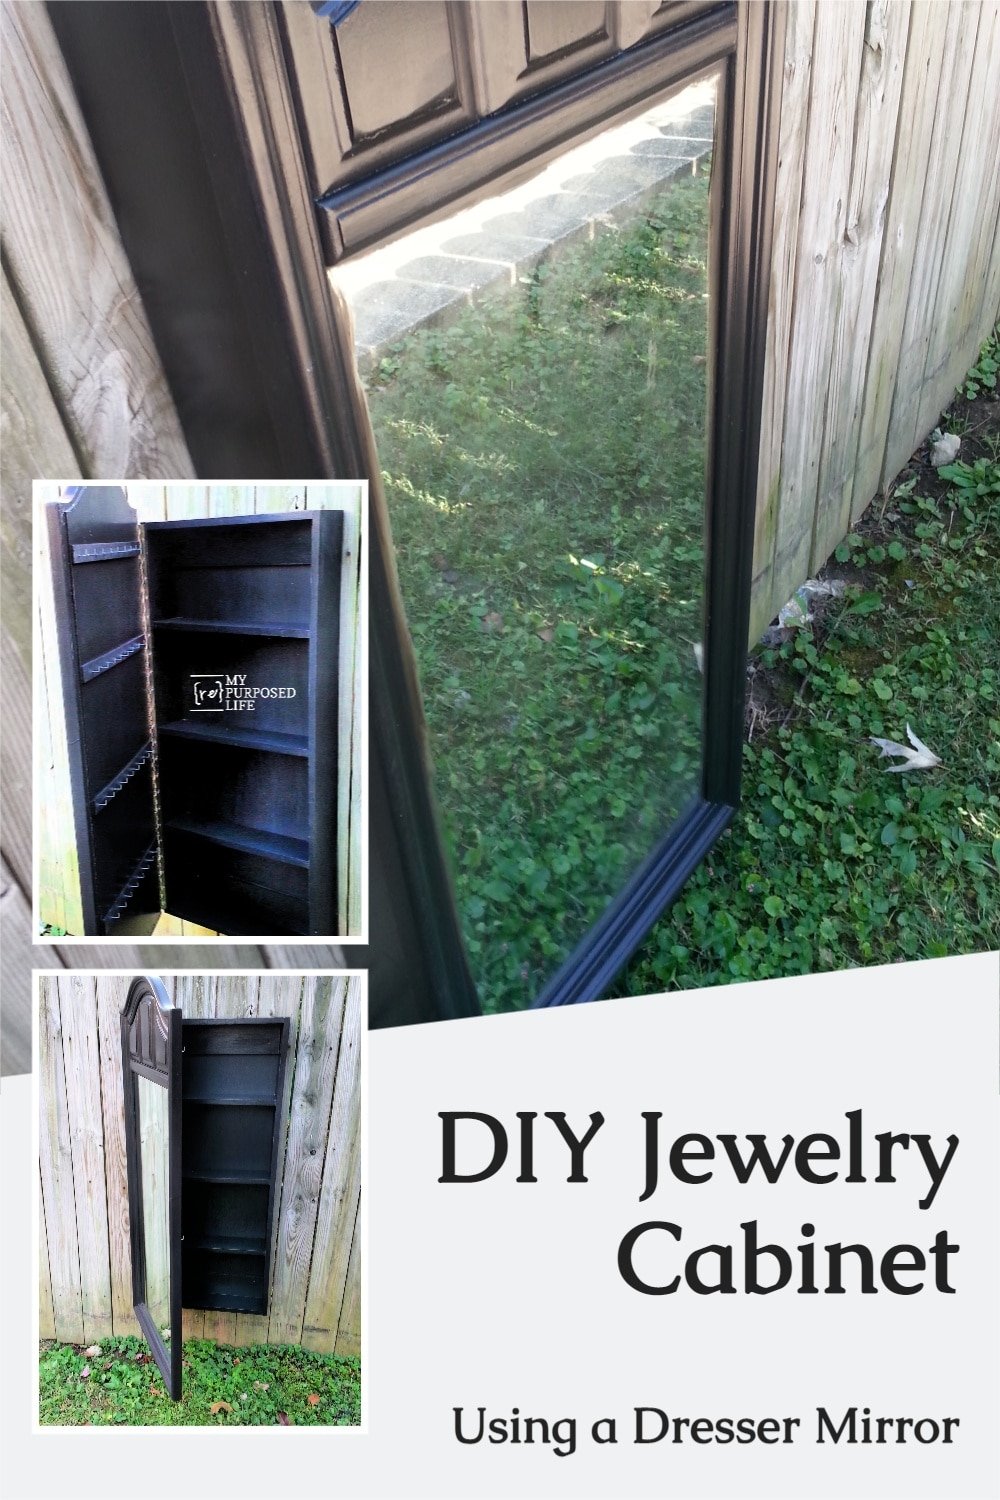 How to make a jewelry cabinet using a reclaimed thrift store mirror. Build a box, add jewelry accessories, and voila, you have the perfect jewelry cabinet. #MyRepurposedLife #repurposed #upcycled #thriftstore #mirror #jewelry #armoire #diy via @repurposedlife